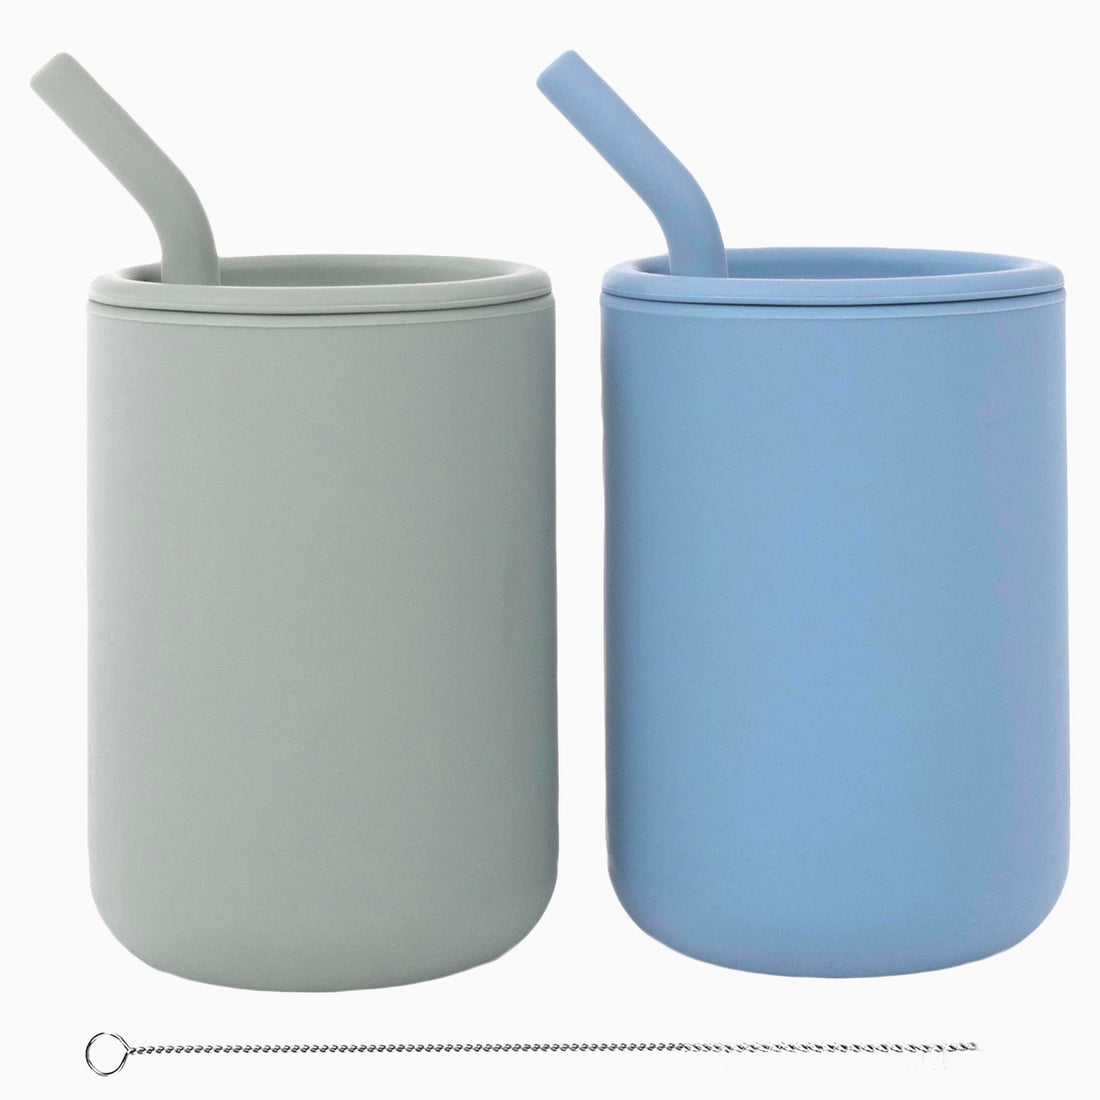 Toddler Sippy Cup with Straw, Baby Silicone Tumbler Cup spill